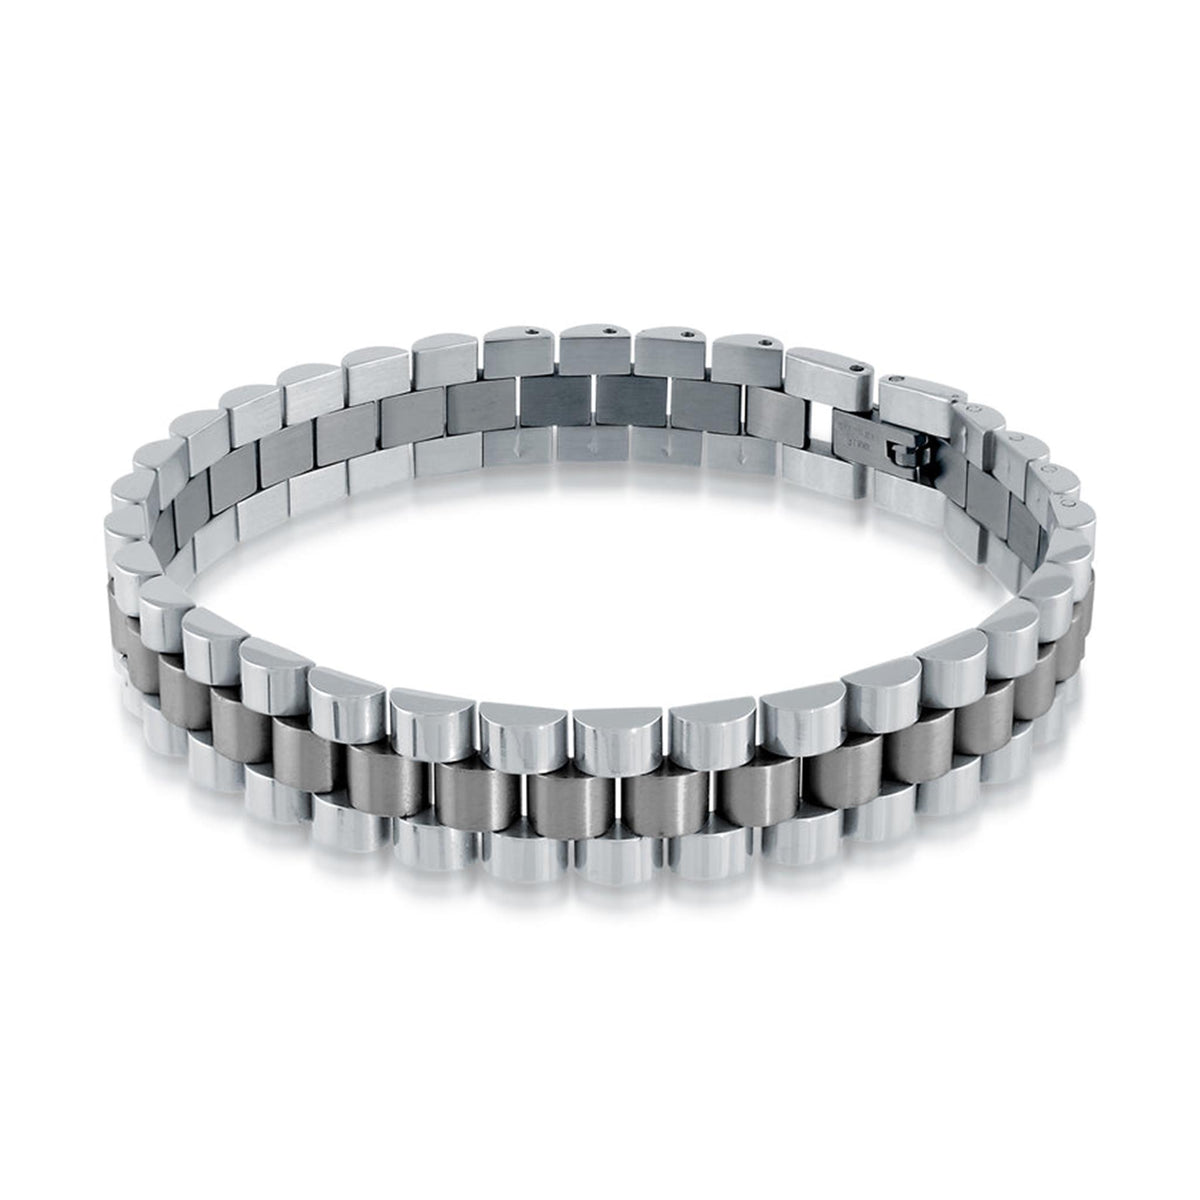 Stainless Steel Iconic Watch Band Style Bracelet